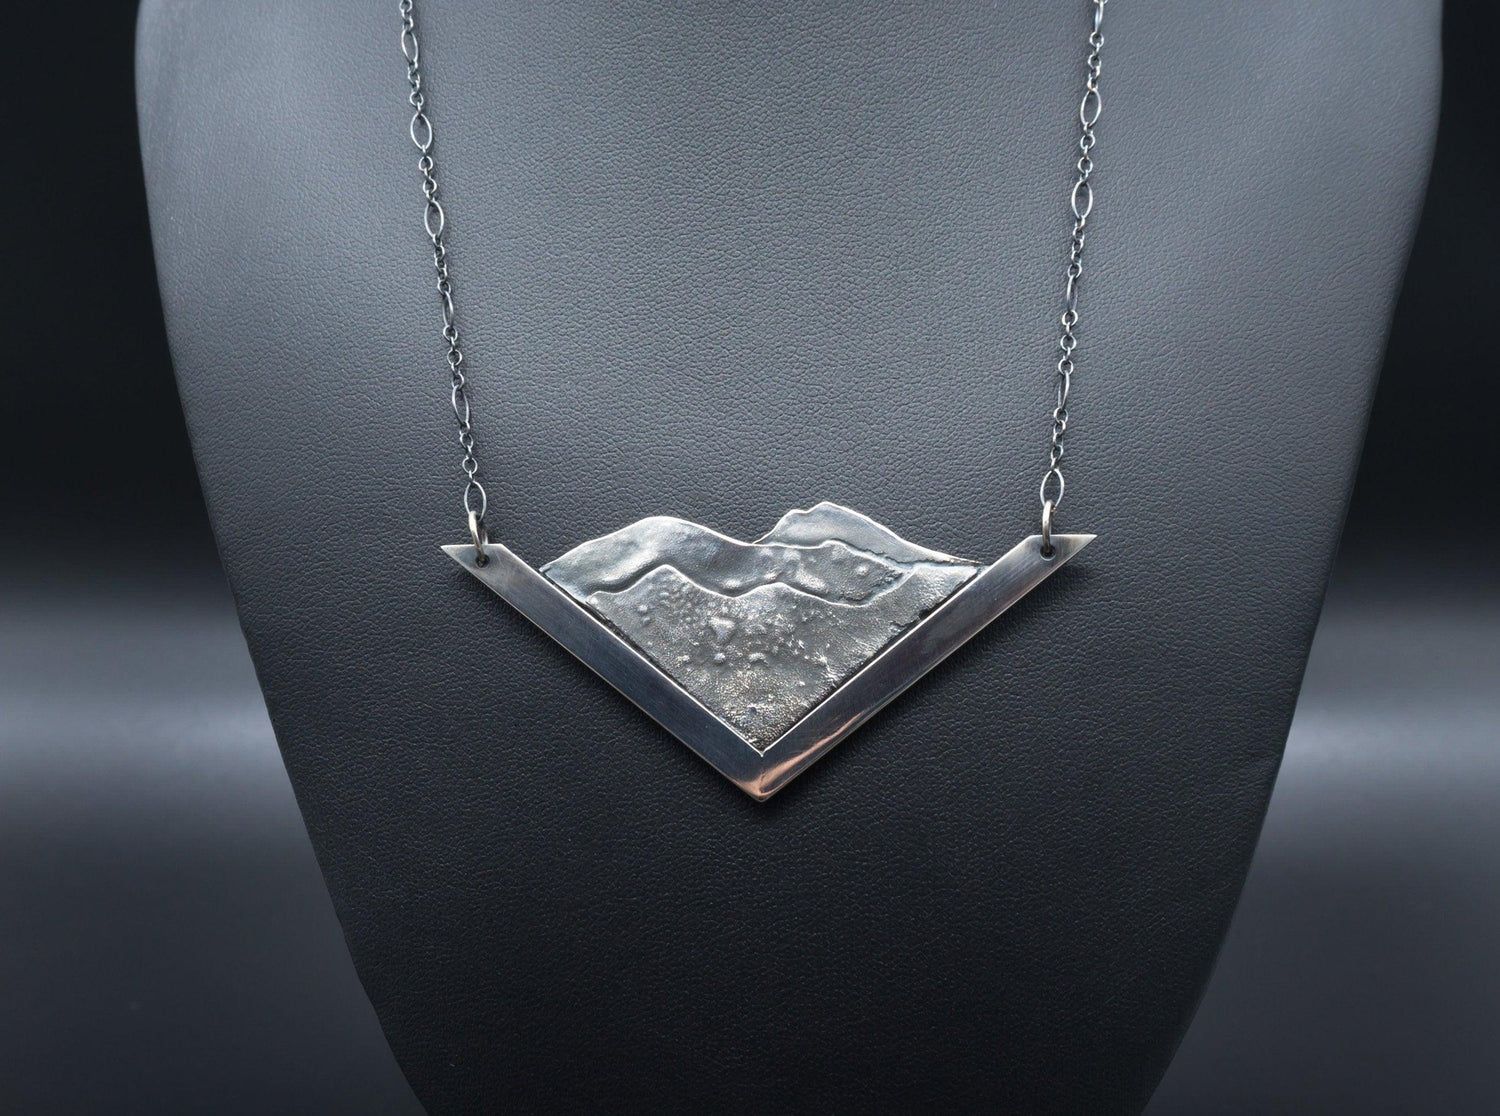 Mountain Landscape Pendant | .925 Sterling Silver | Hand fabricated | One of a kind necklace with 24" Chain - Ecotone Jewelers